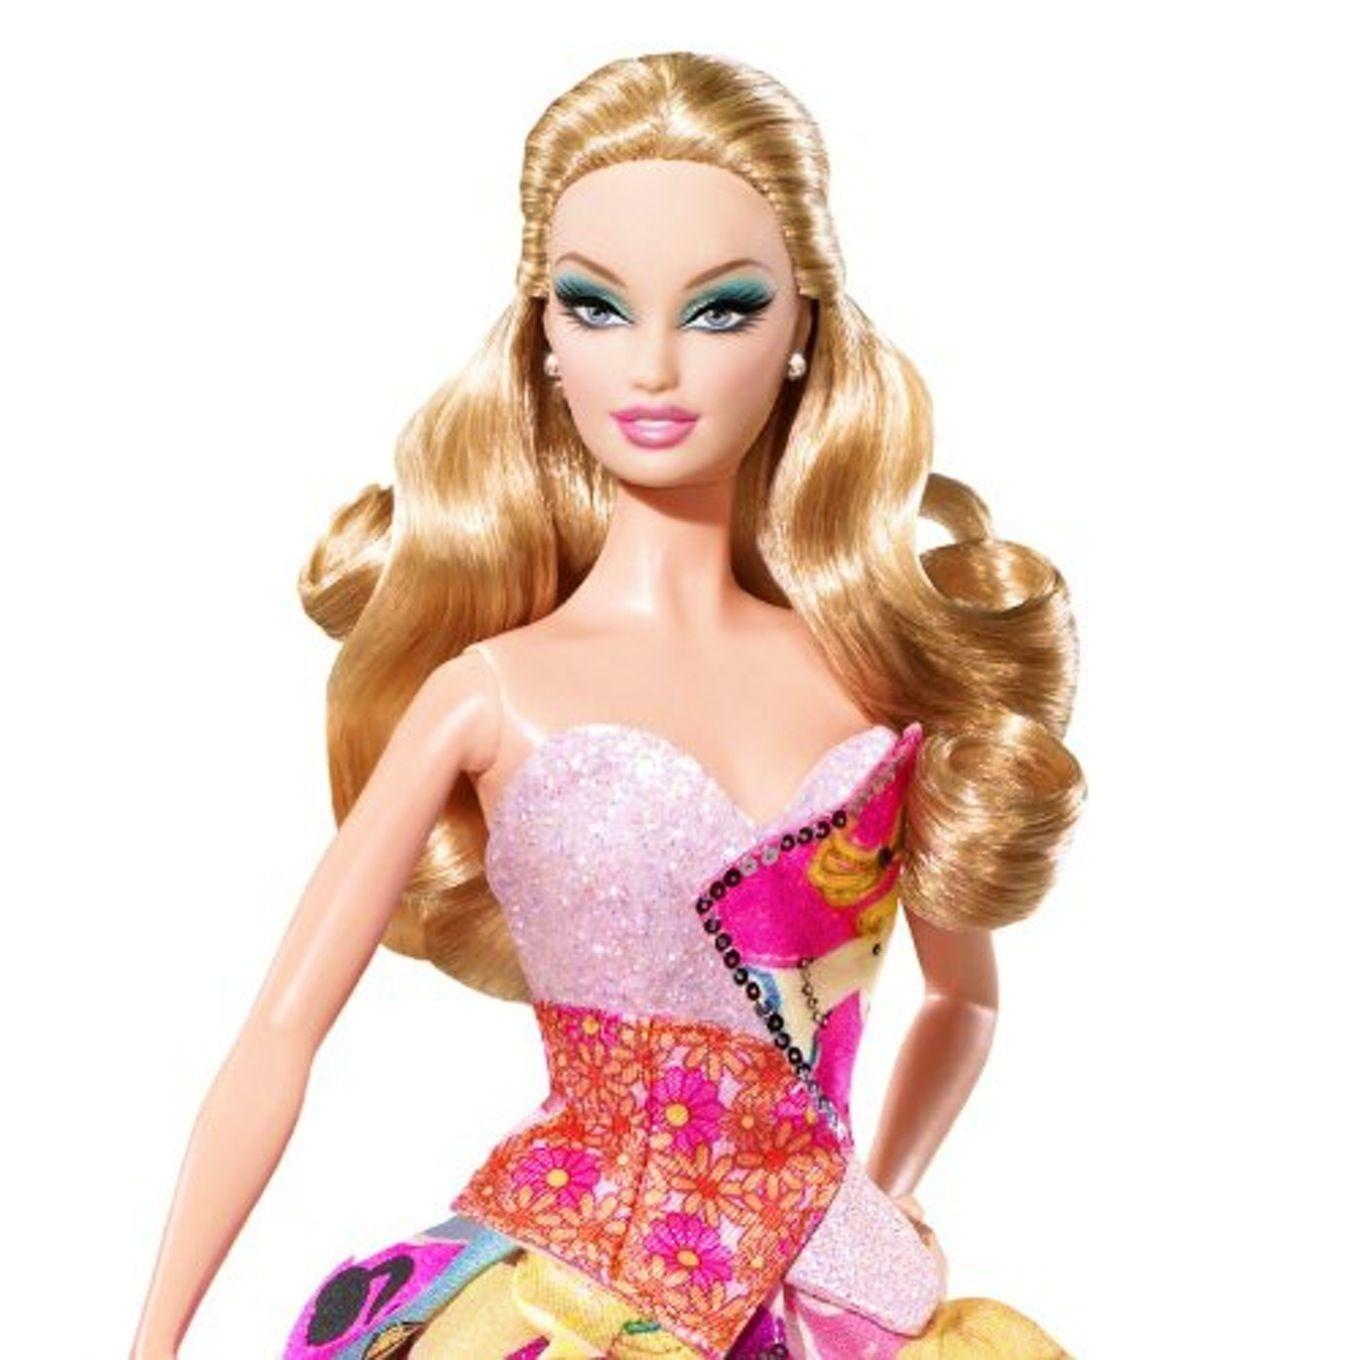 Pretty, Barbie Dolls Image HD Of The World Games Barbies Amazing